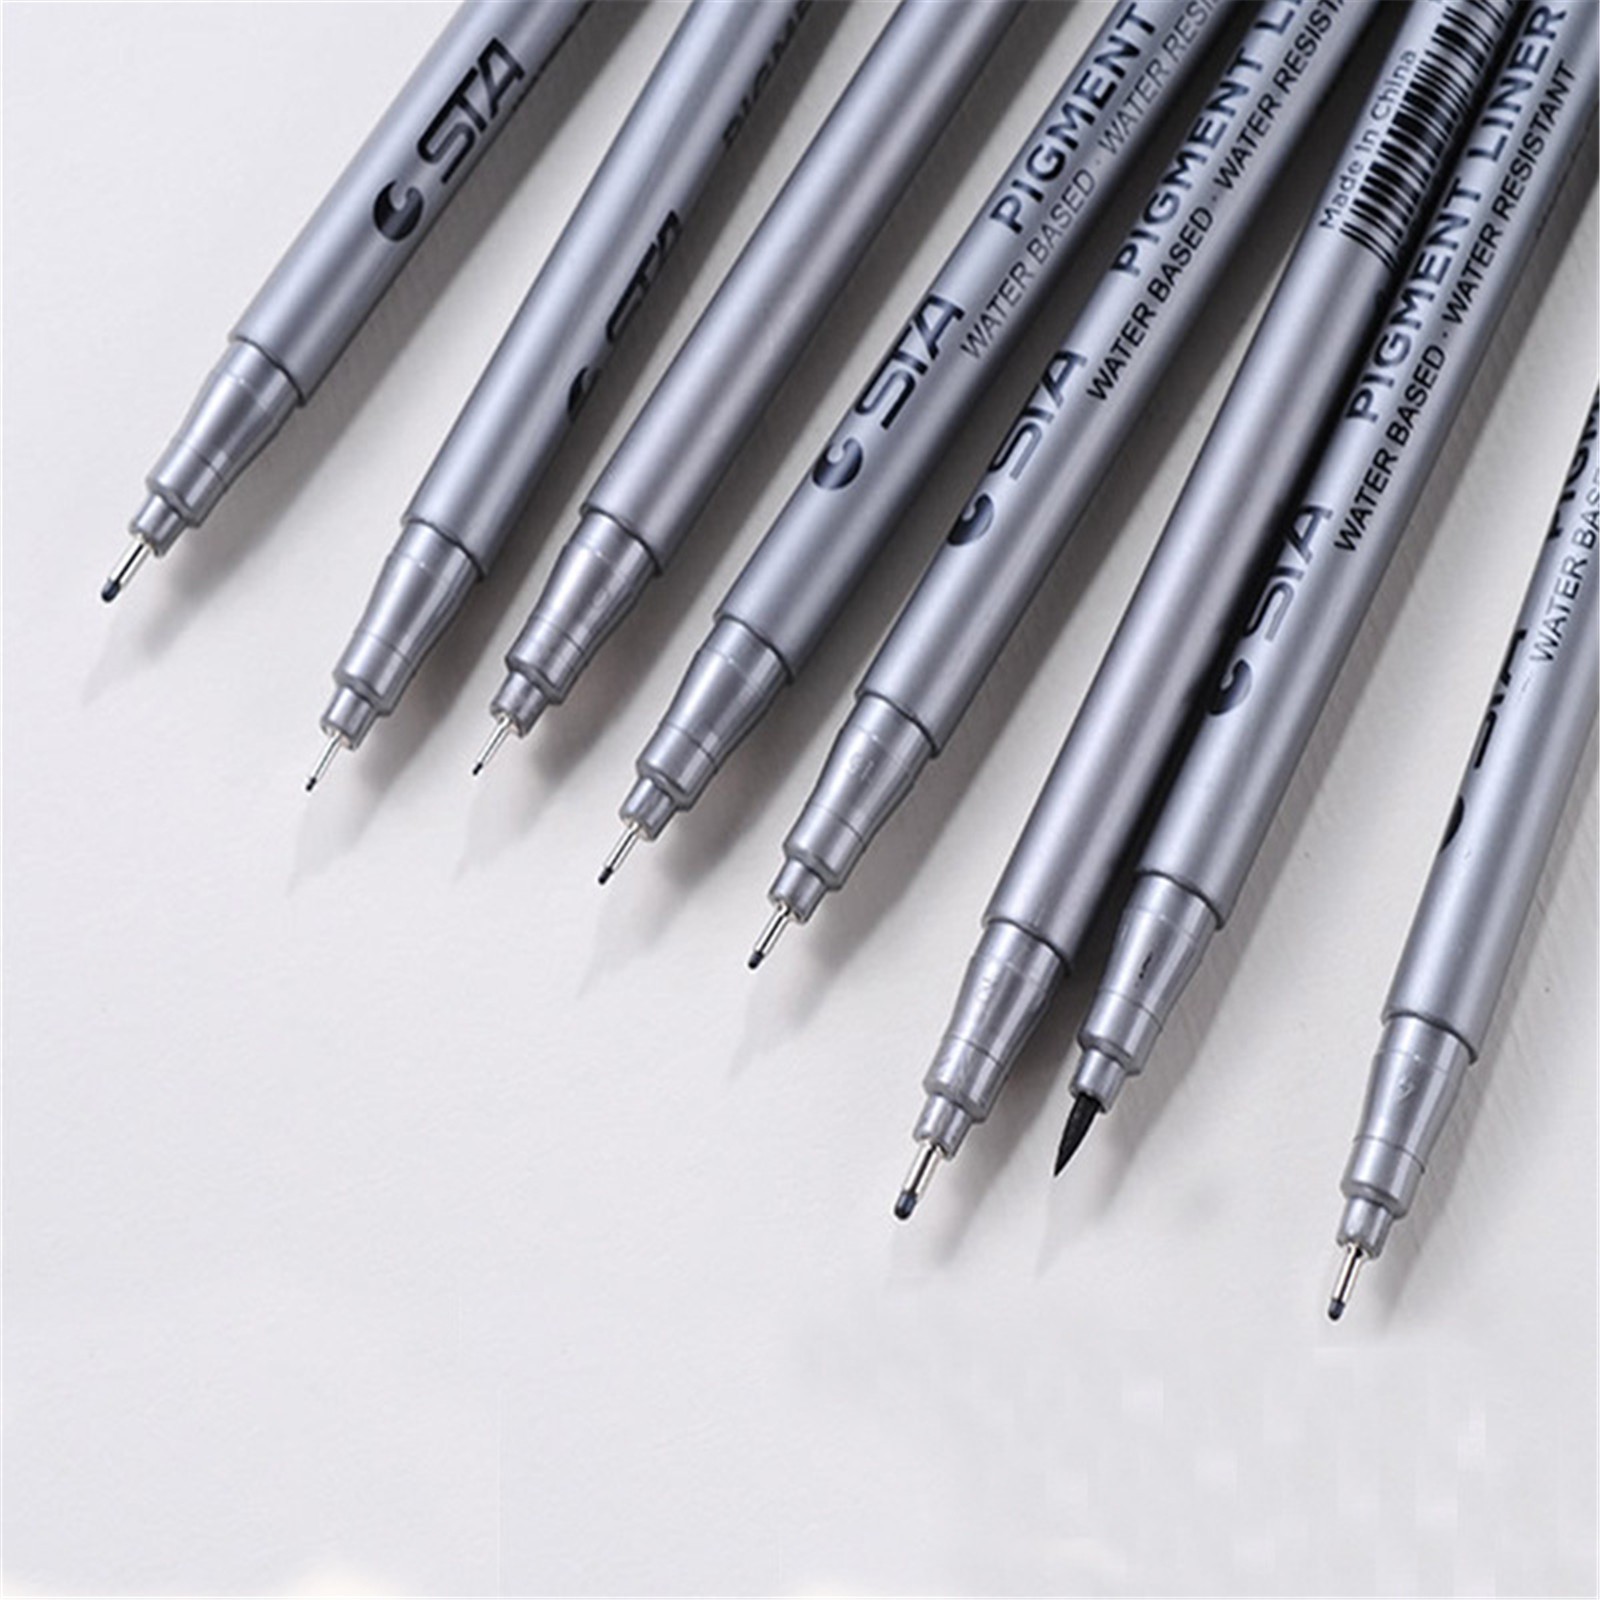 Pens Colorful Bulk Dyvicl Pens Ink Manga Anime Fine Artist Illustration for Drawing Tip 2.5ml Writing Office Stationery Archival Pen .5, Size: One